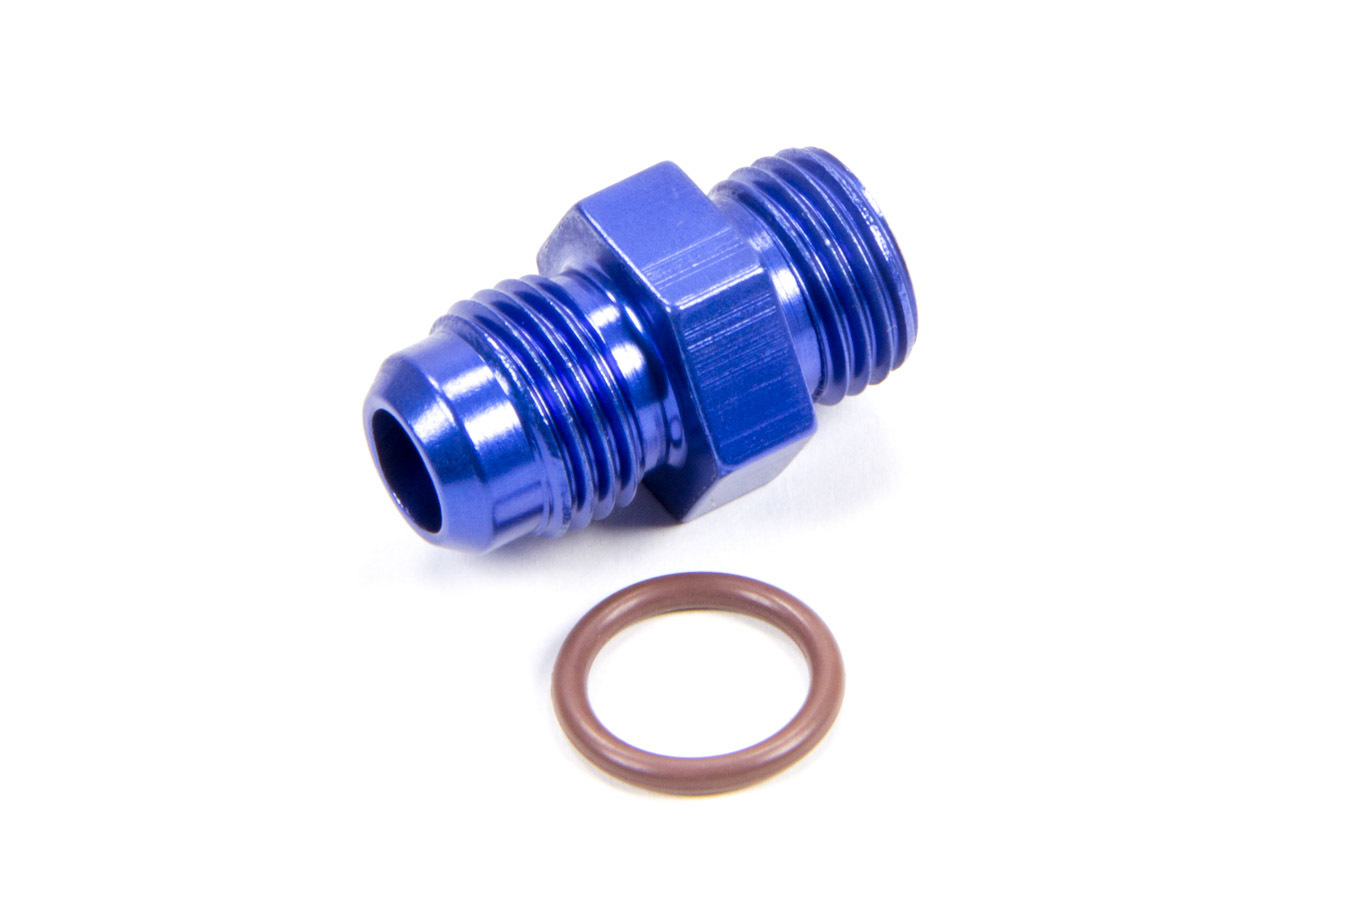 Fragola 495100 Fitting, Adapter, Straight, 6 AN Male to 6 AN Male O-Ring, Aluminum, Blue Anodized, Each